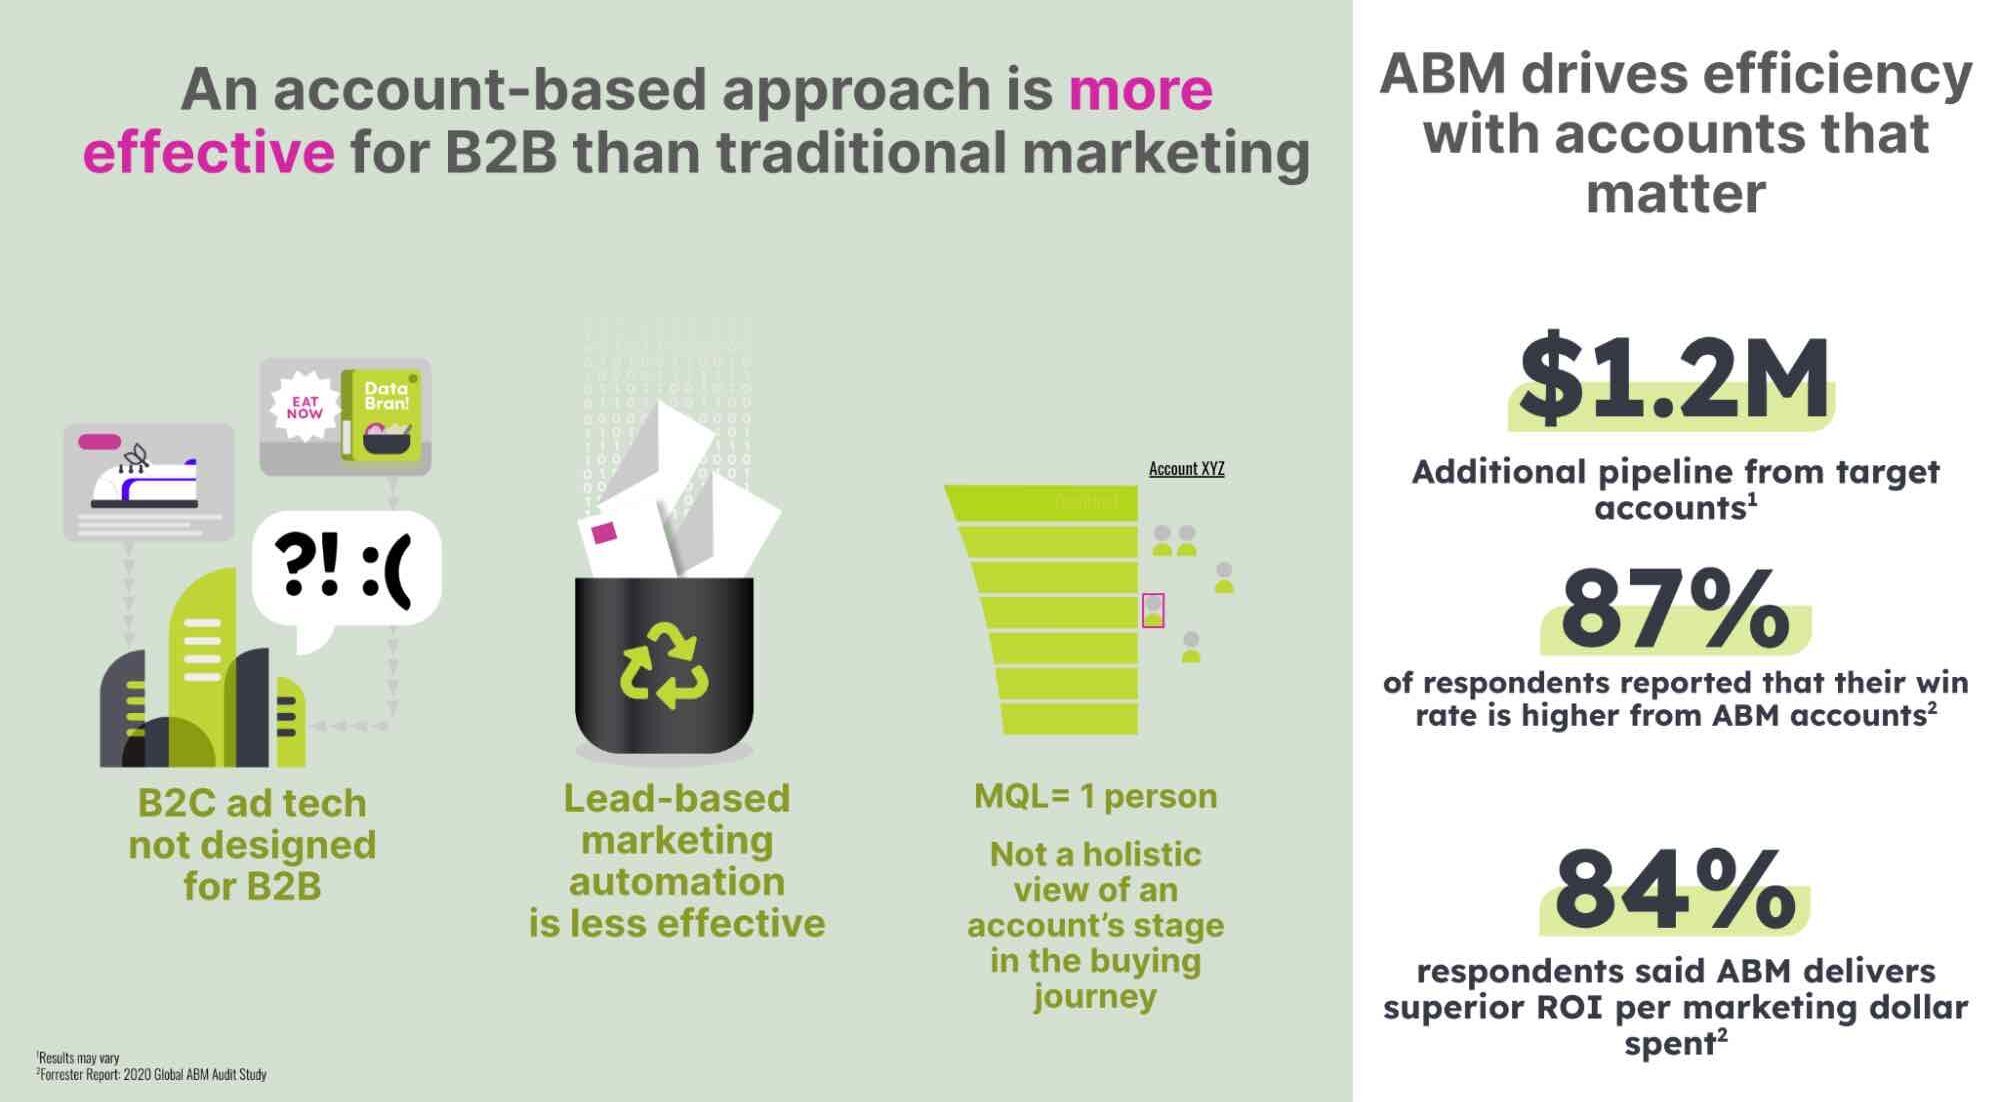 The Demandbase account-based approach is more effective for B2B than traditional marketing.